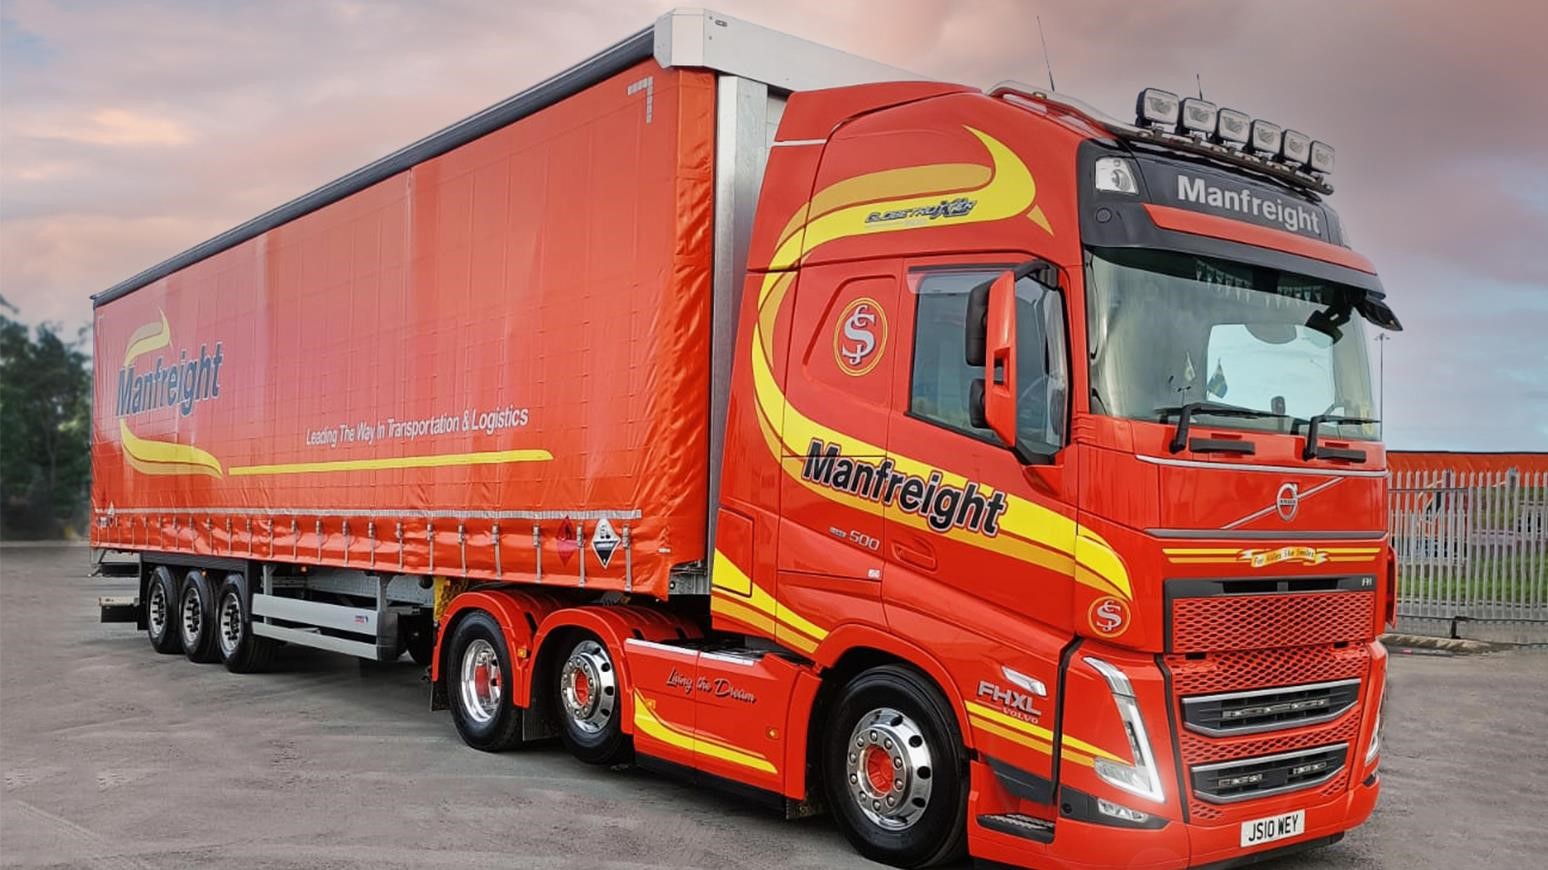 20 New Schmitz Cargobull S.CS Fixed Roof Curtainsiders Help Manfreight Expand New Division